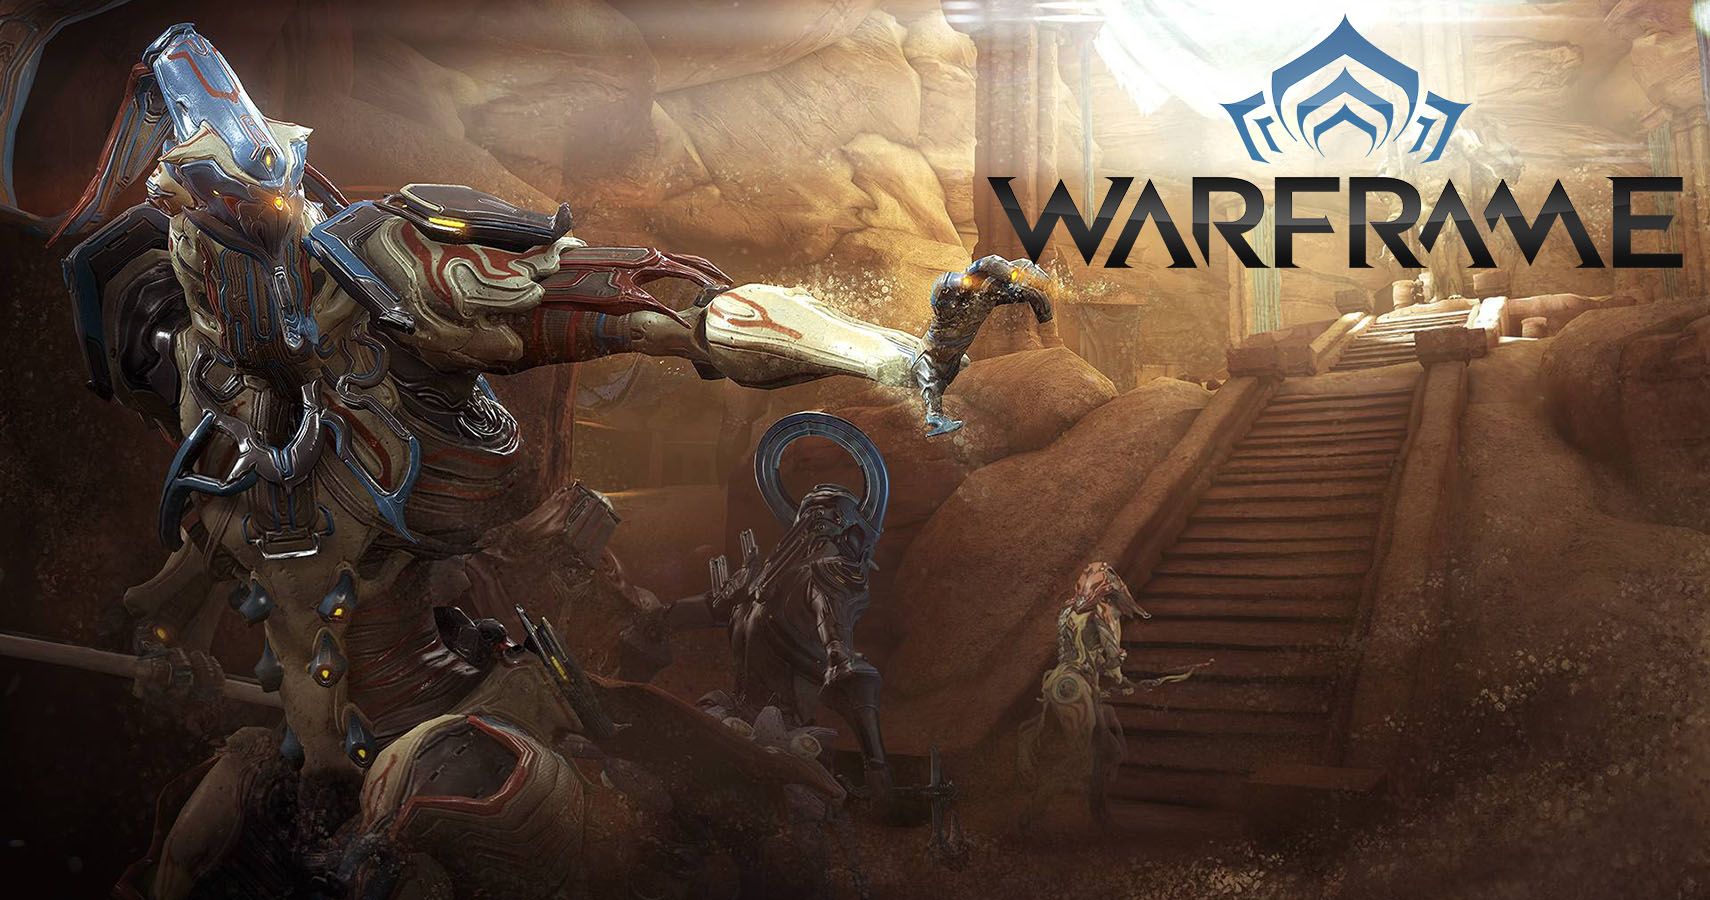 Warframe logo and rendering from the Warframe press kit